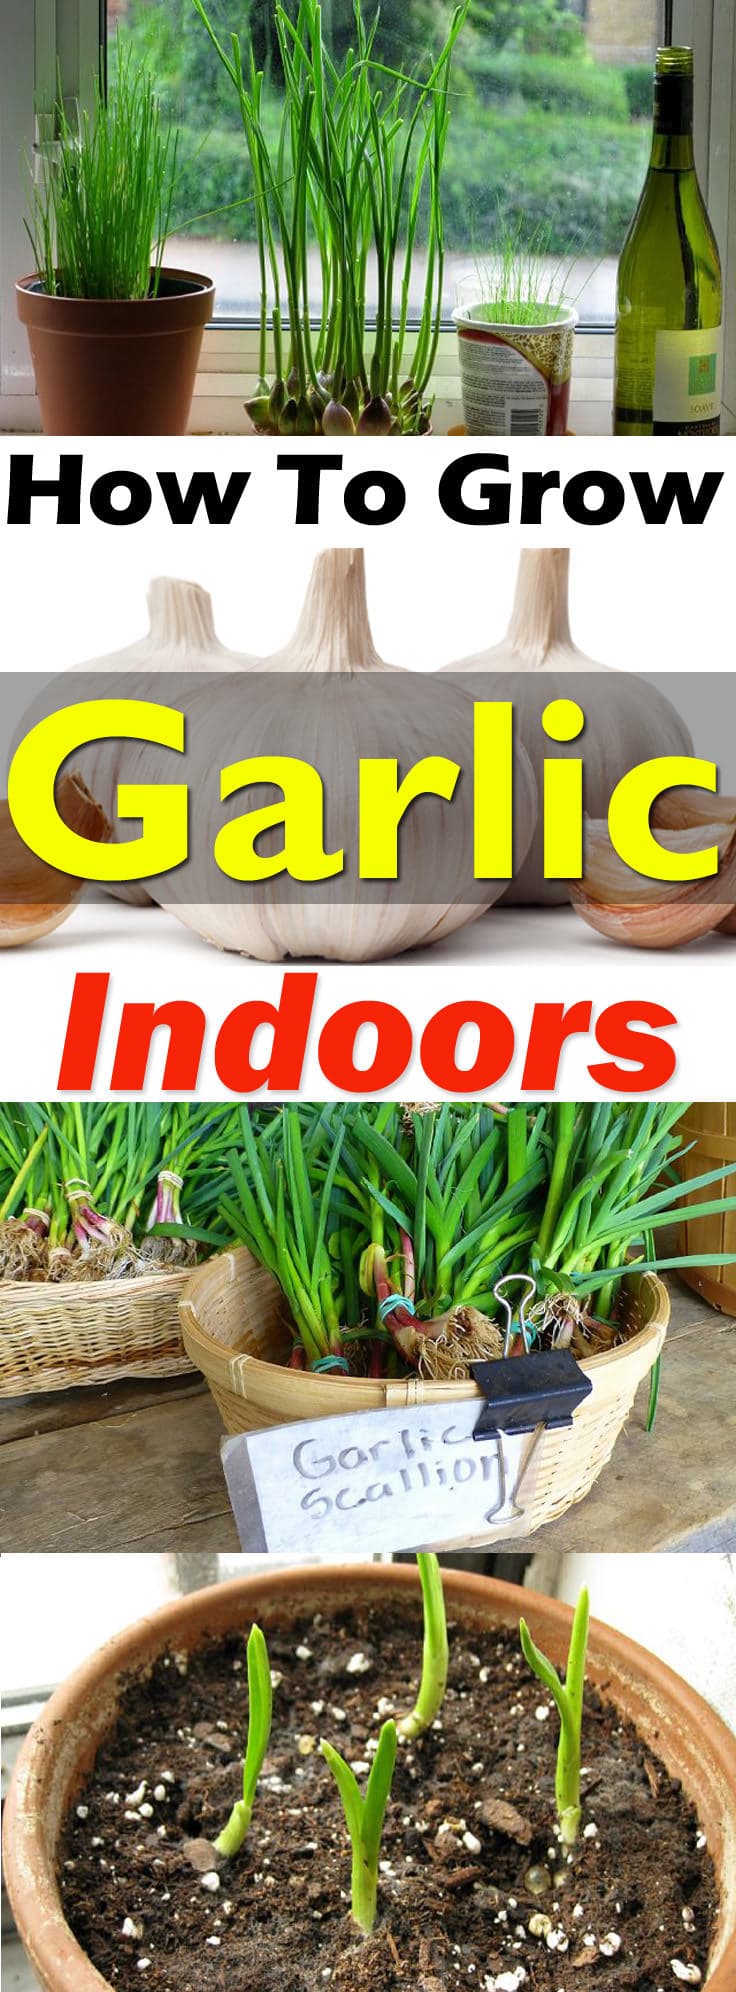 Growing garlic indoors is not difficult and you'll be able to get the supply of fresh green stalks, flowers, and even the garlic bulbs. Learn more!